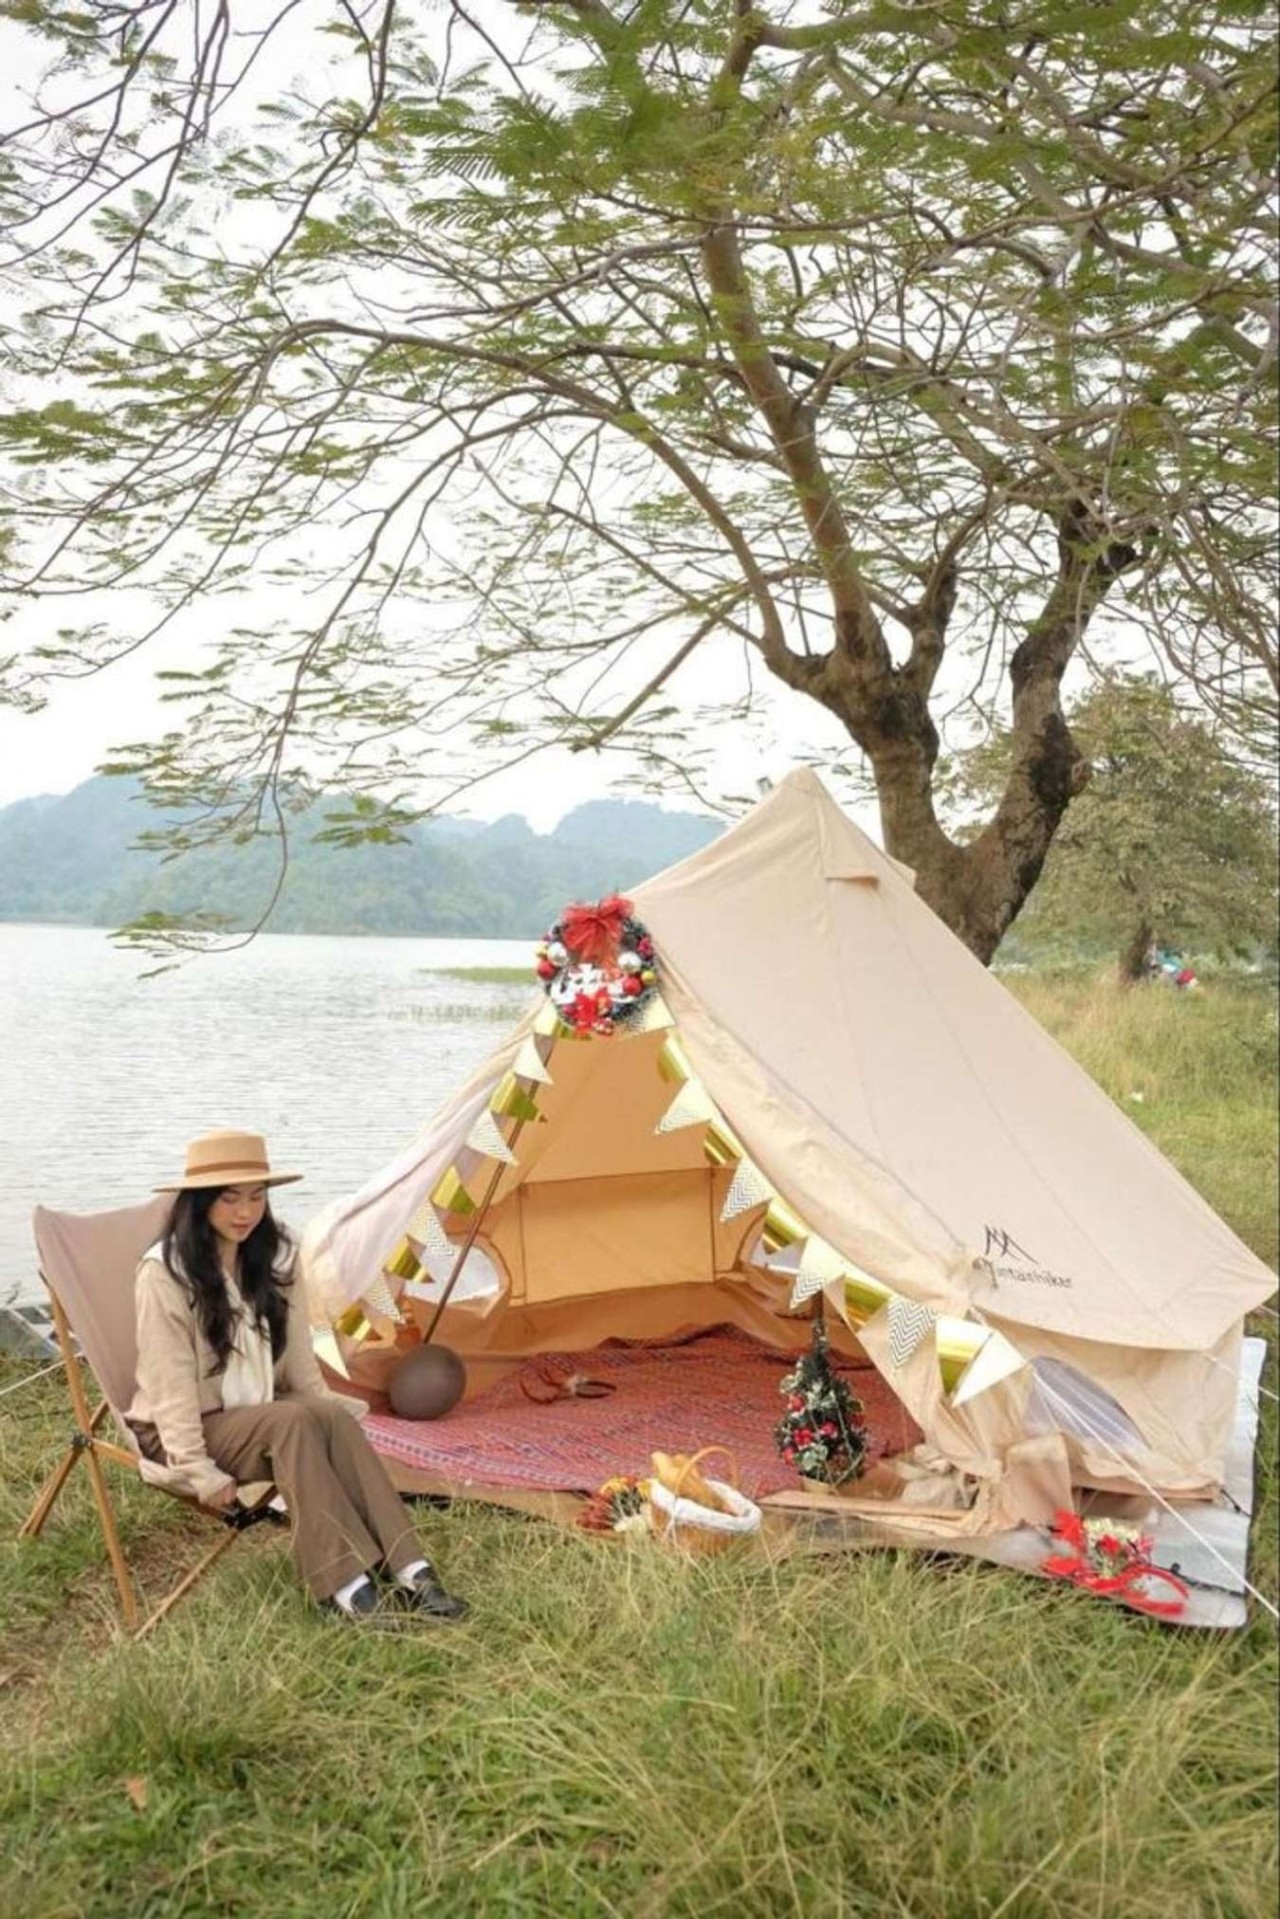 Explore The Most Beautiful Camping Sites For A Relaxing Weekend Near Hanoi